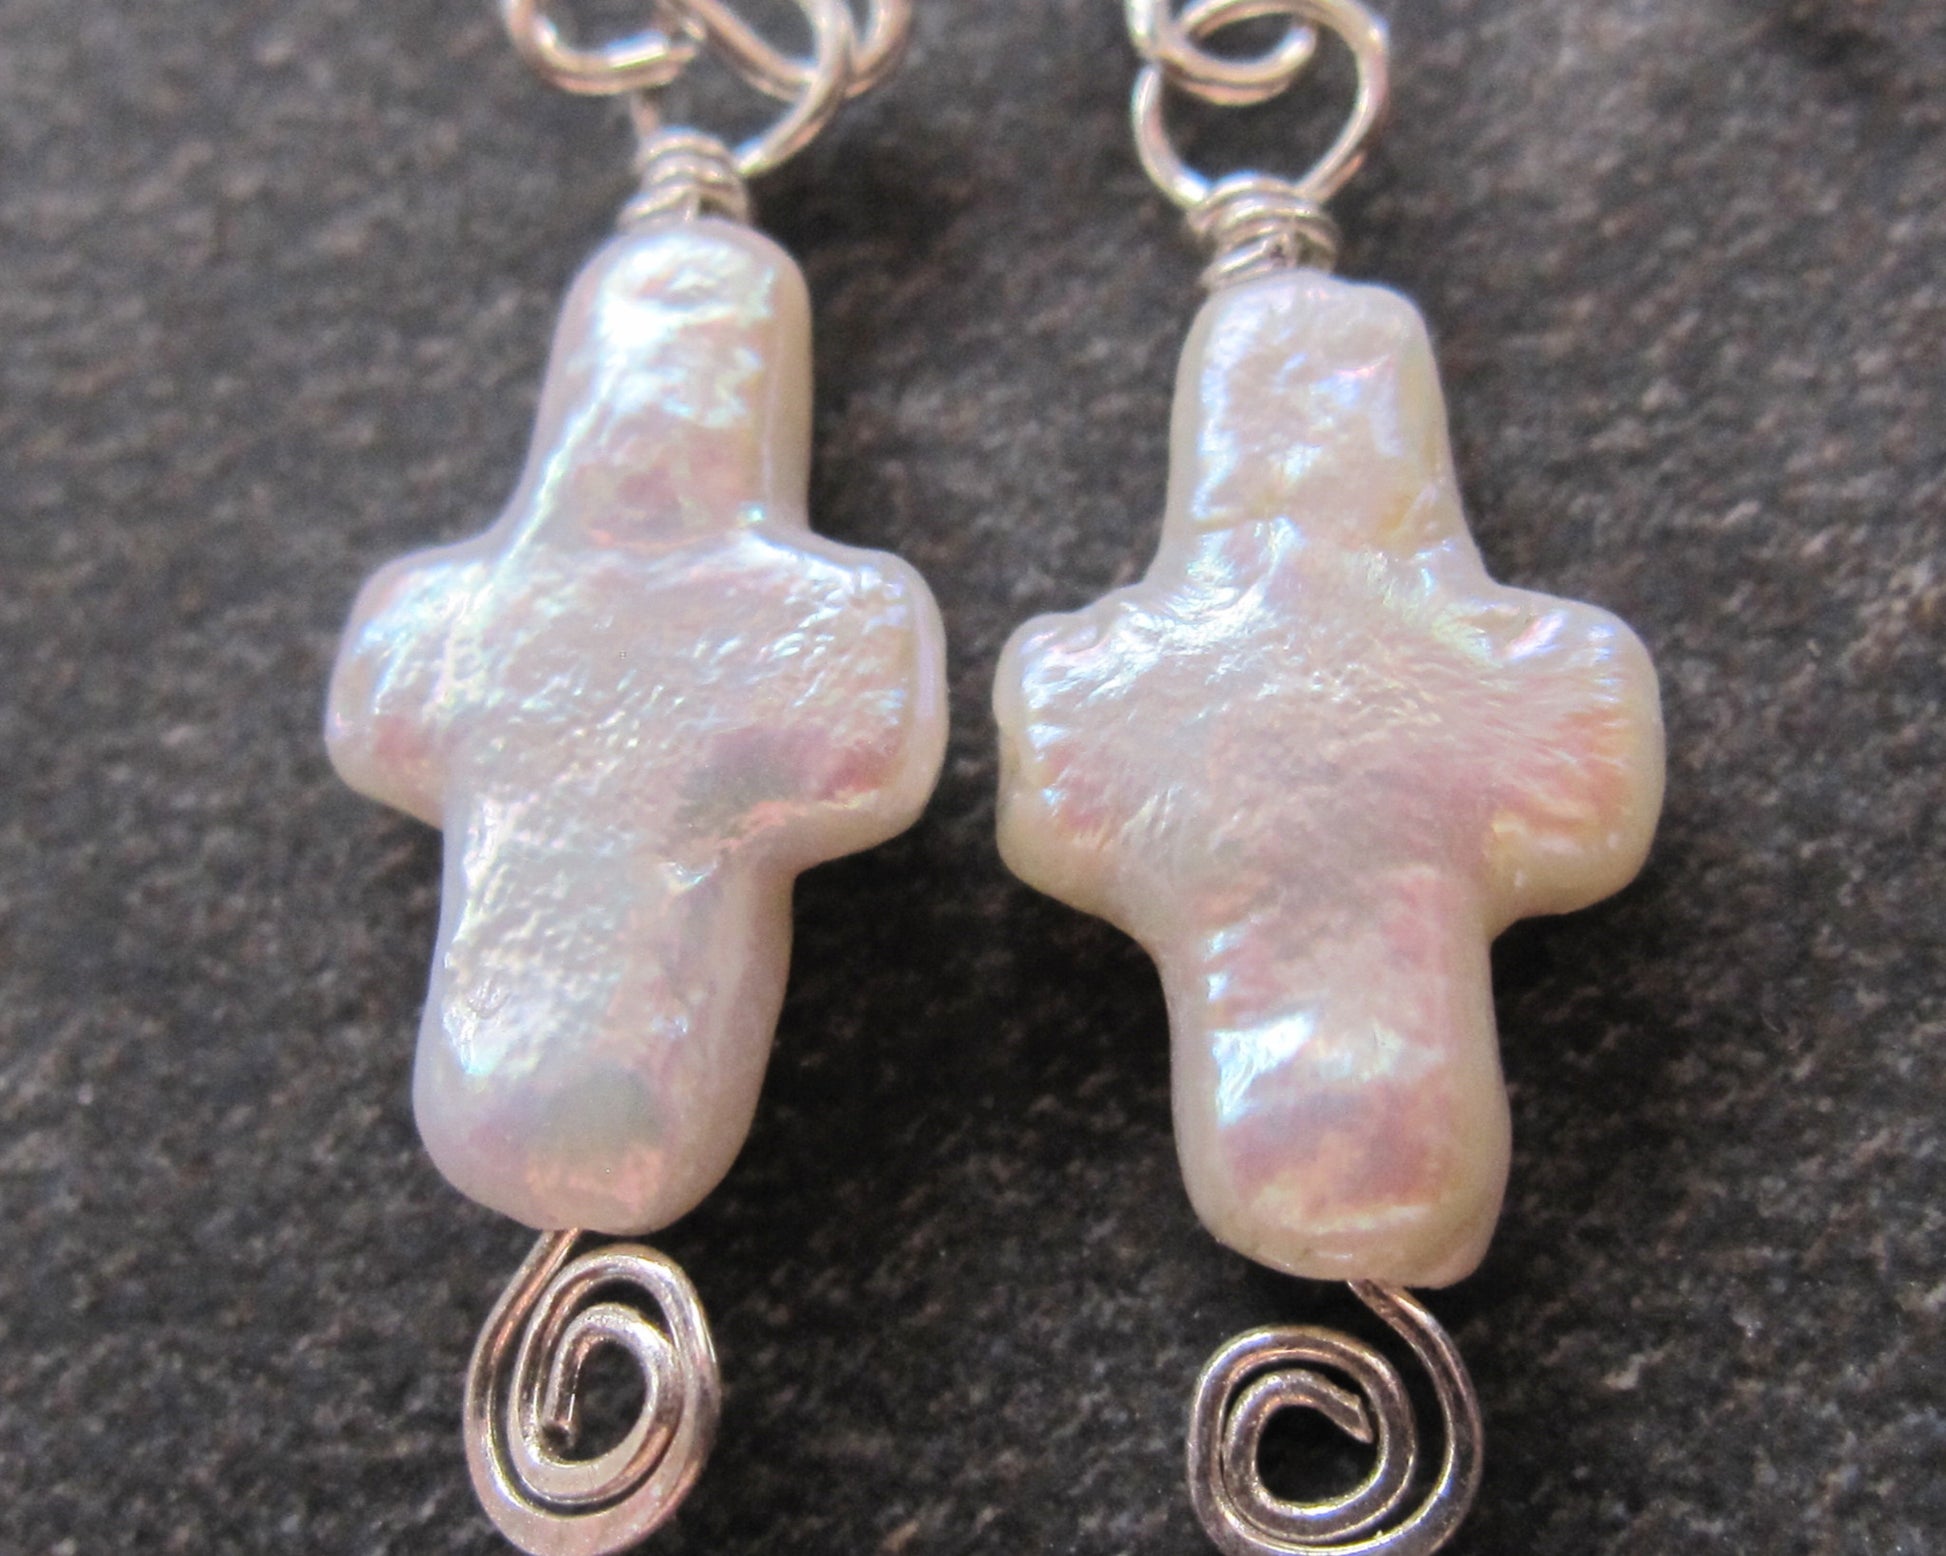      Celtic Inspired, White Pearl Cross Earrings with Eternity Coils, Freshwater Cultured Pearls and Sterling Silver.